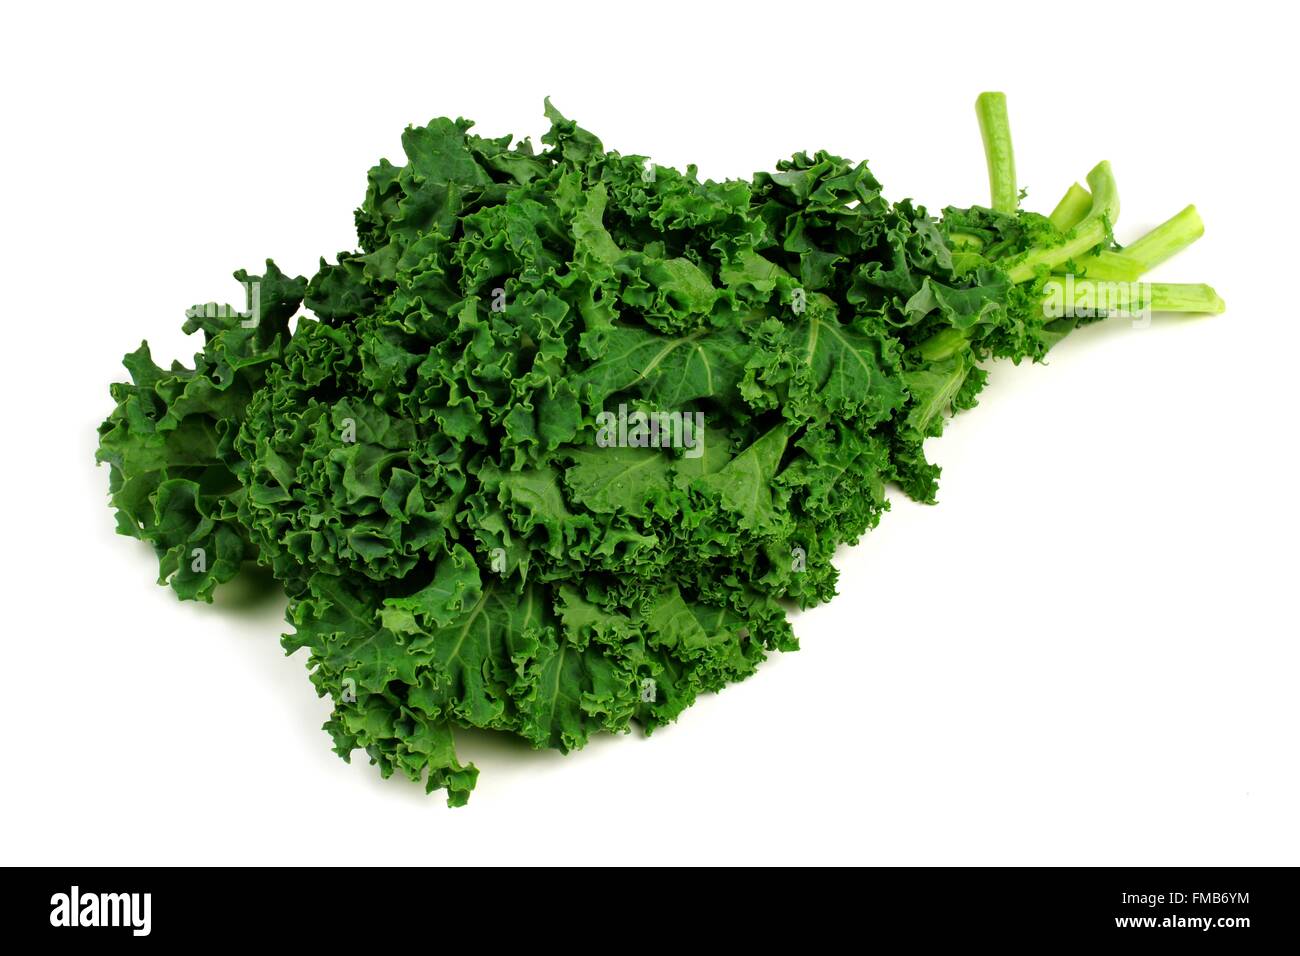 Bunch of fresh kale over a white background Banque D'Images